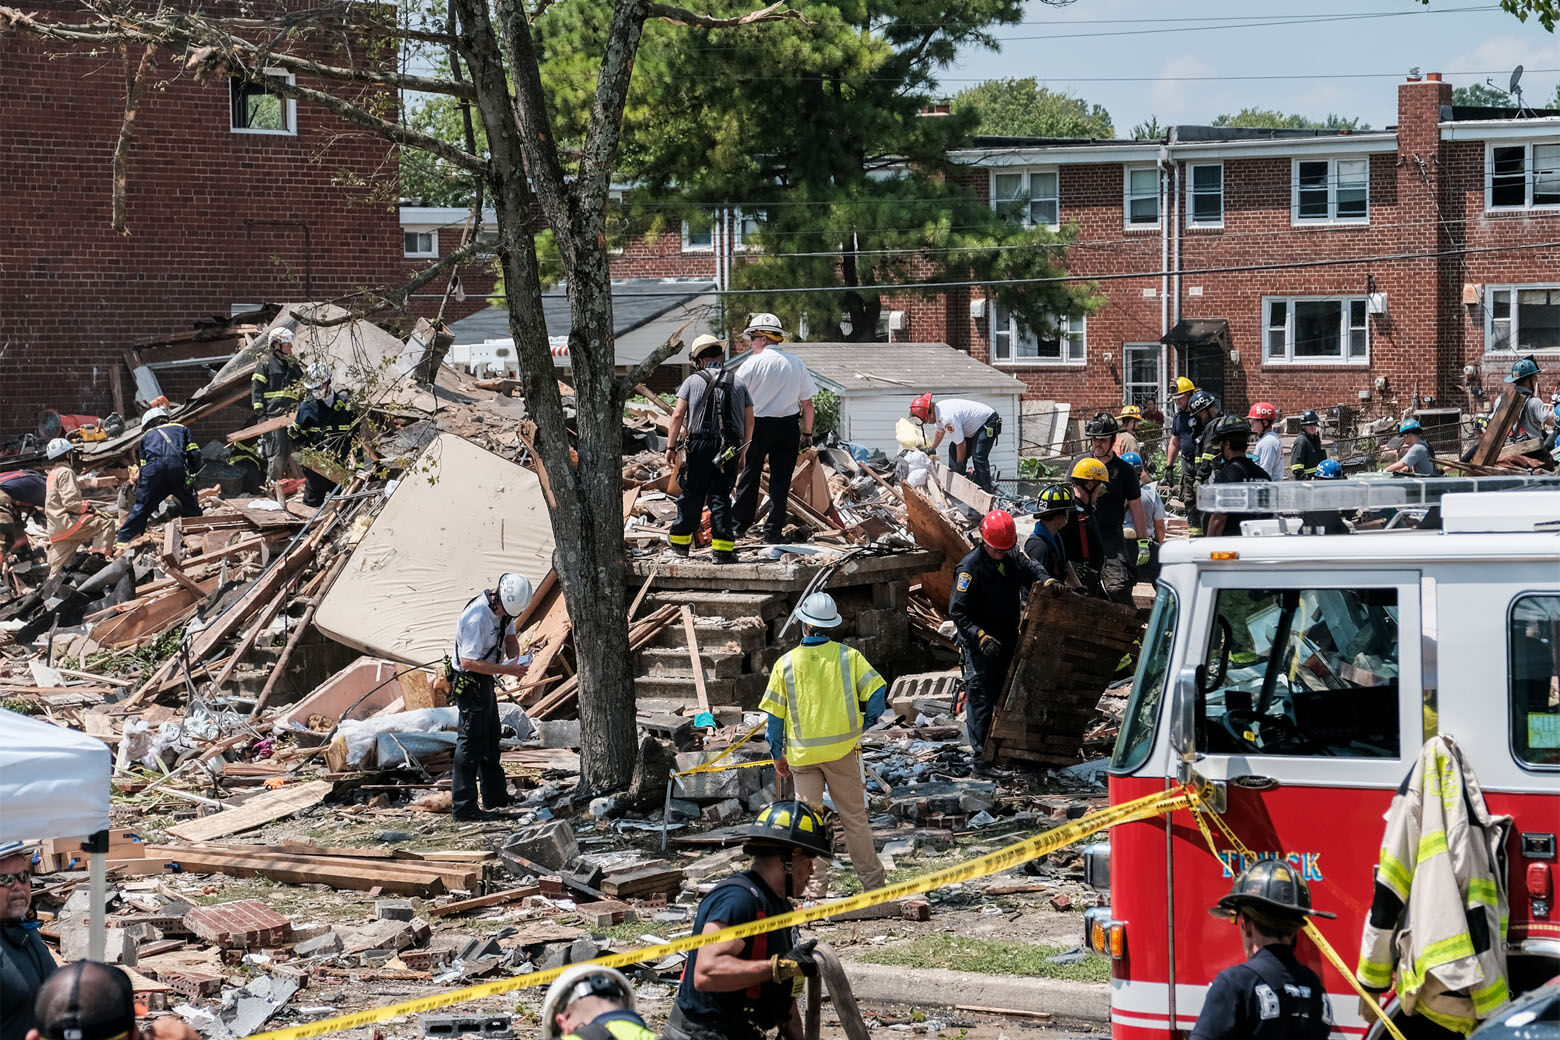 BALTIMORE, MD - AUGUST 10: First responders search for survivors at the scene of an explosion on August 10, 2020 in Baltimore, Maryland. Early reports indicate that a gas leak may have caused the massive explosion that leveled three homes, causing multiple injuries and at least one fatality. (Photo by Michael A. McCoy/Getty Images)